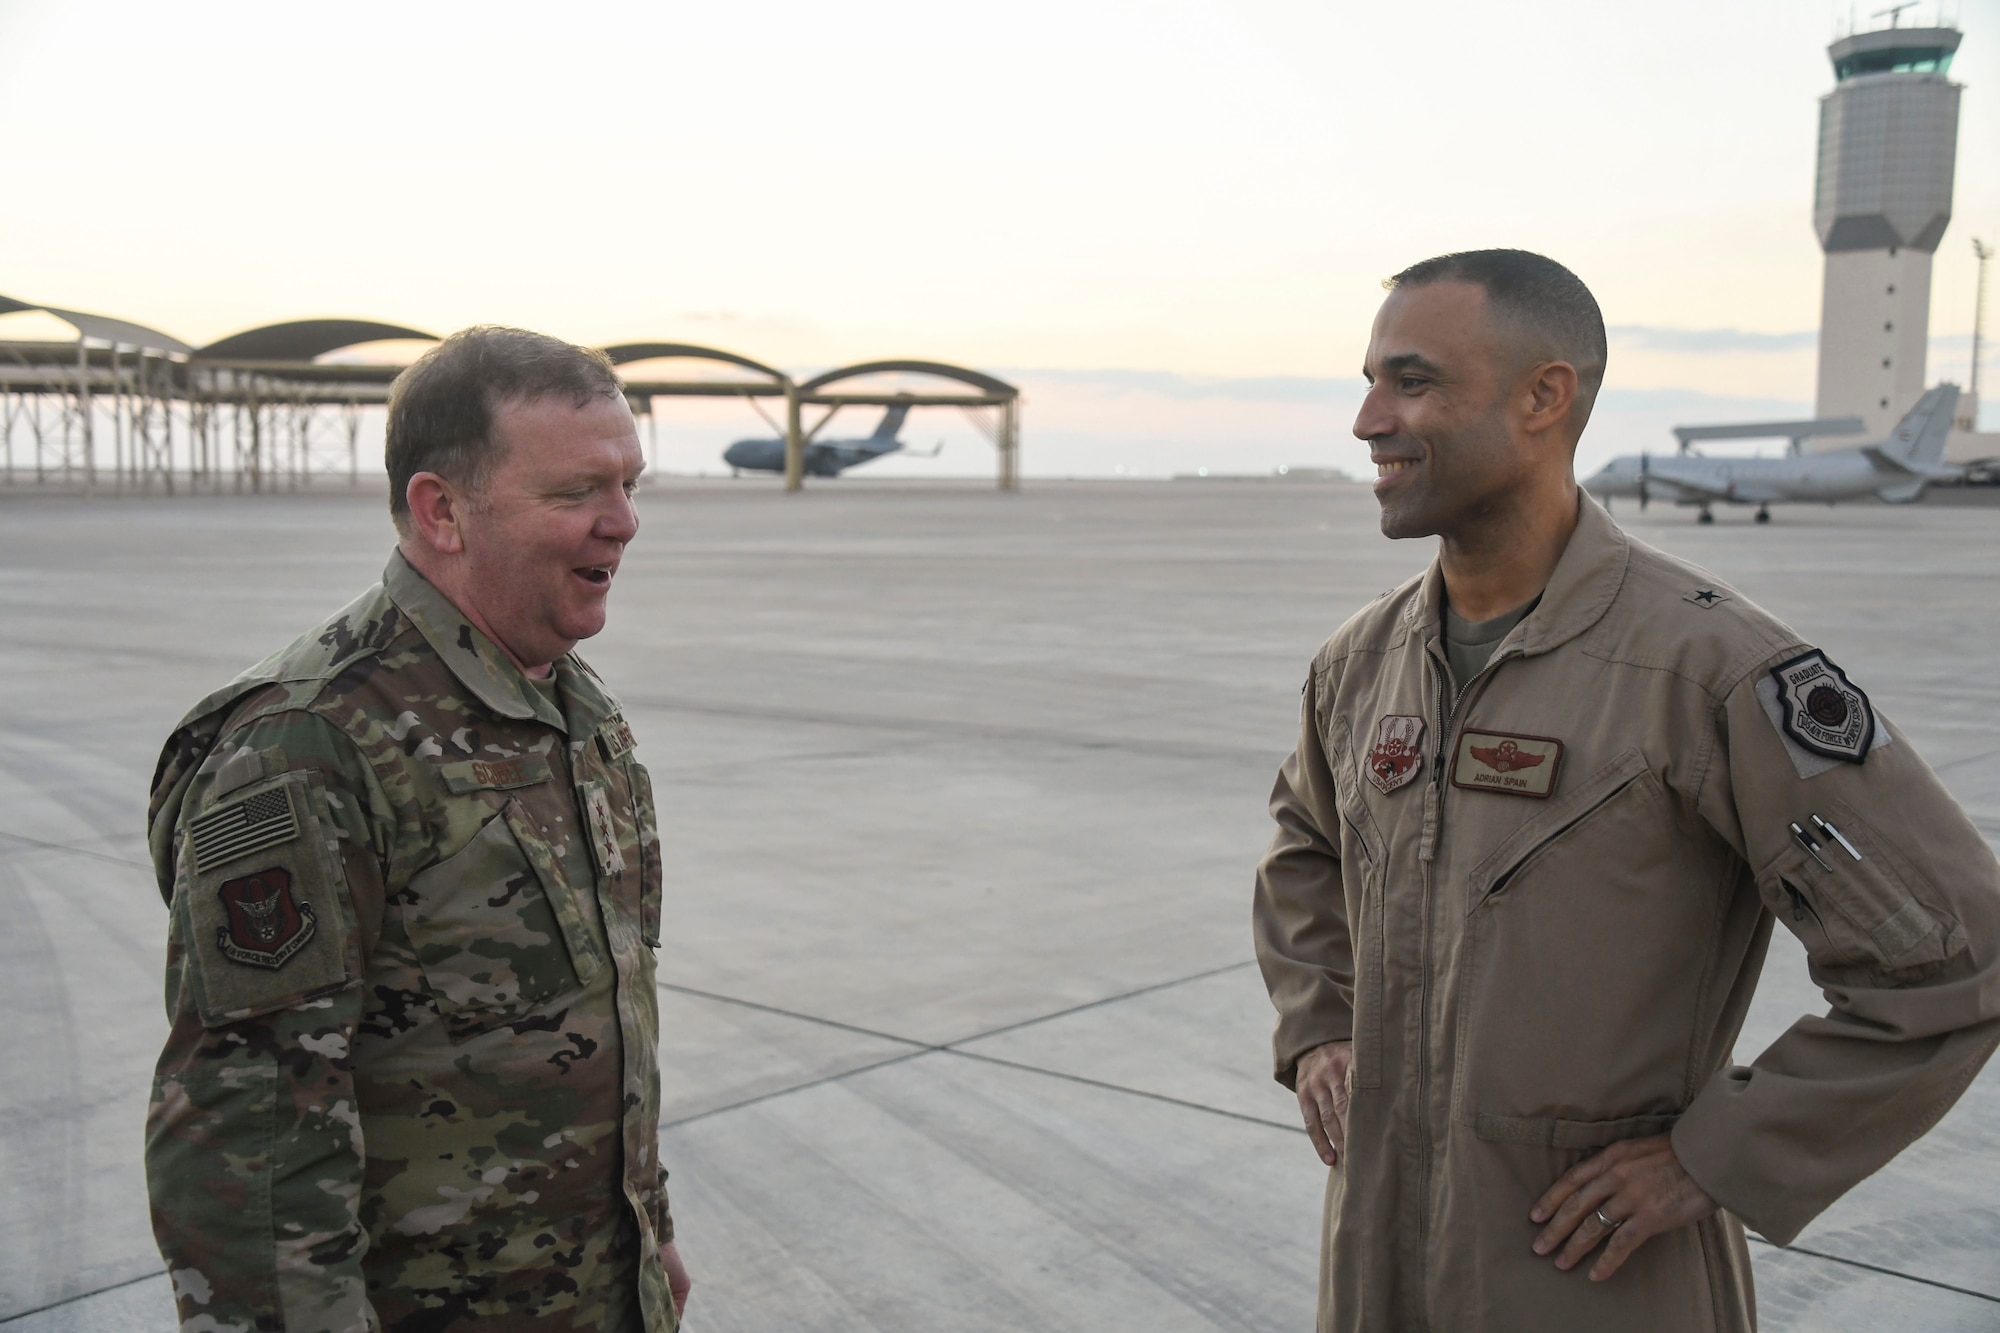 U.S. Air Force Lt. Gen. Richard Scobee, commander of Air Force Reserve Command, shares a story with Brig. Gen. Adrian Spain, 380th Air Expeditionary Wing commander, during his visit to Al Dhafra Air Base, United Arab Emirates, Feb. 13, 2019.